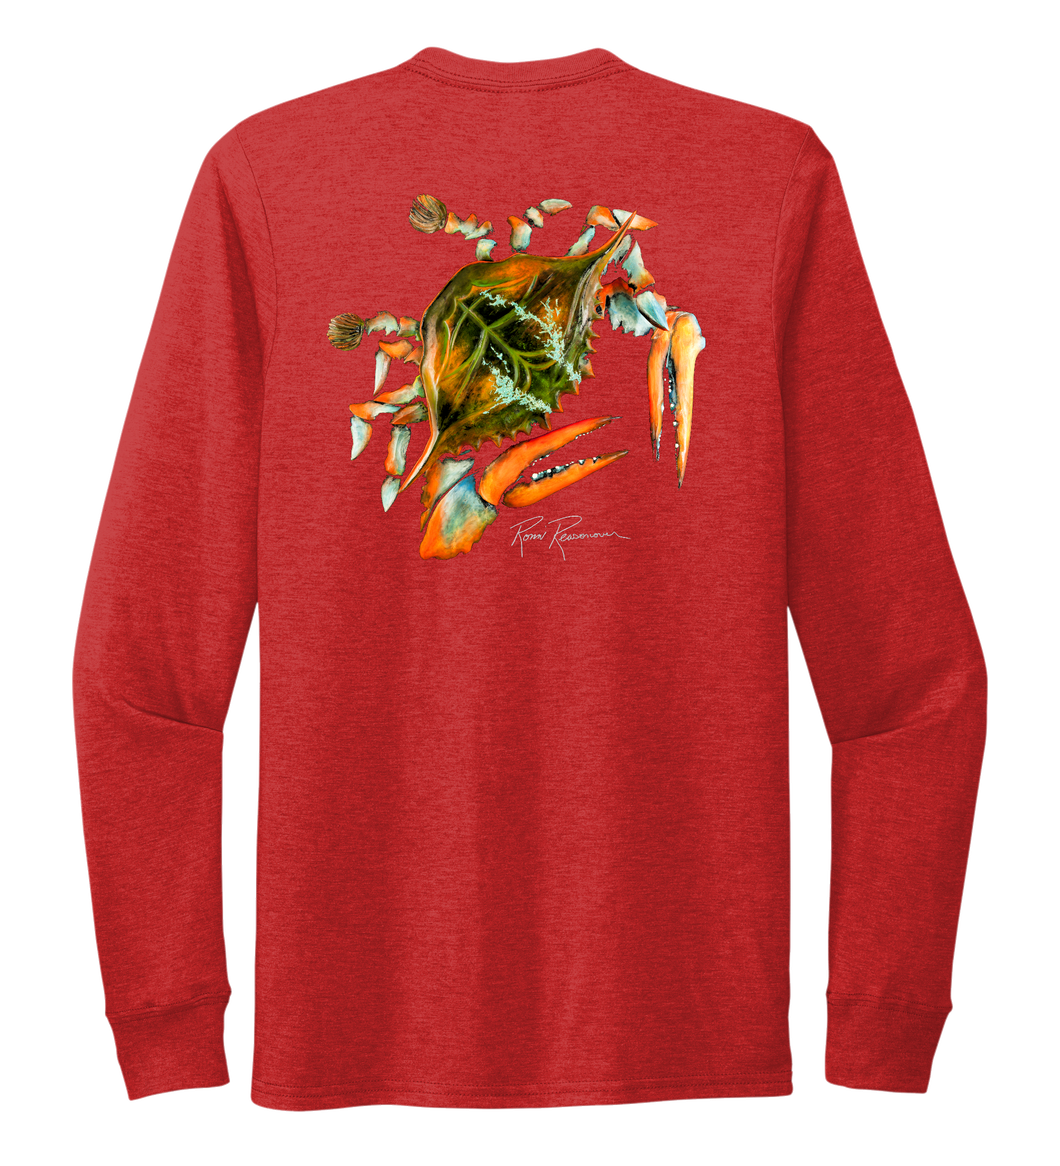 Ronnie Reasonover, The Crab, Crew Neck Long Sleeve T-Shirt in Bravo Red